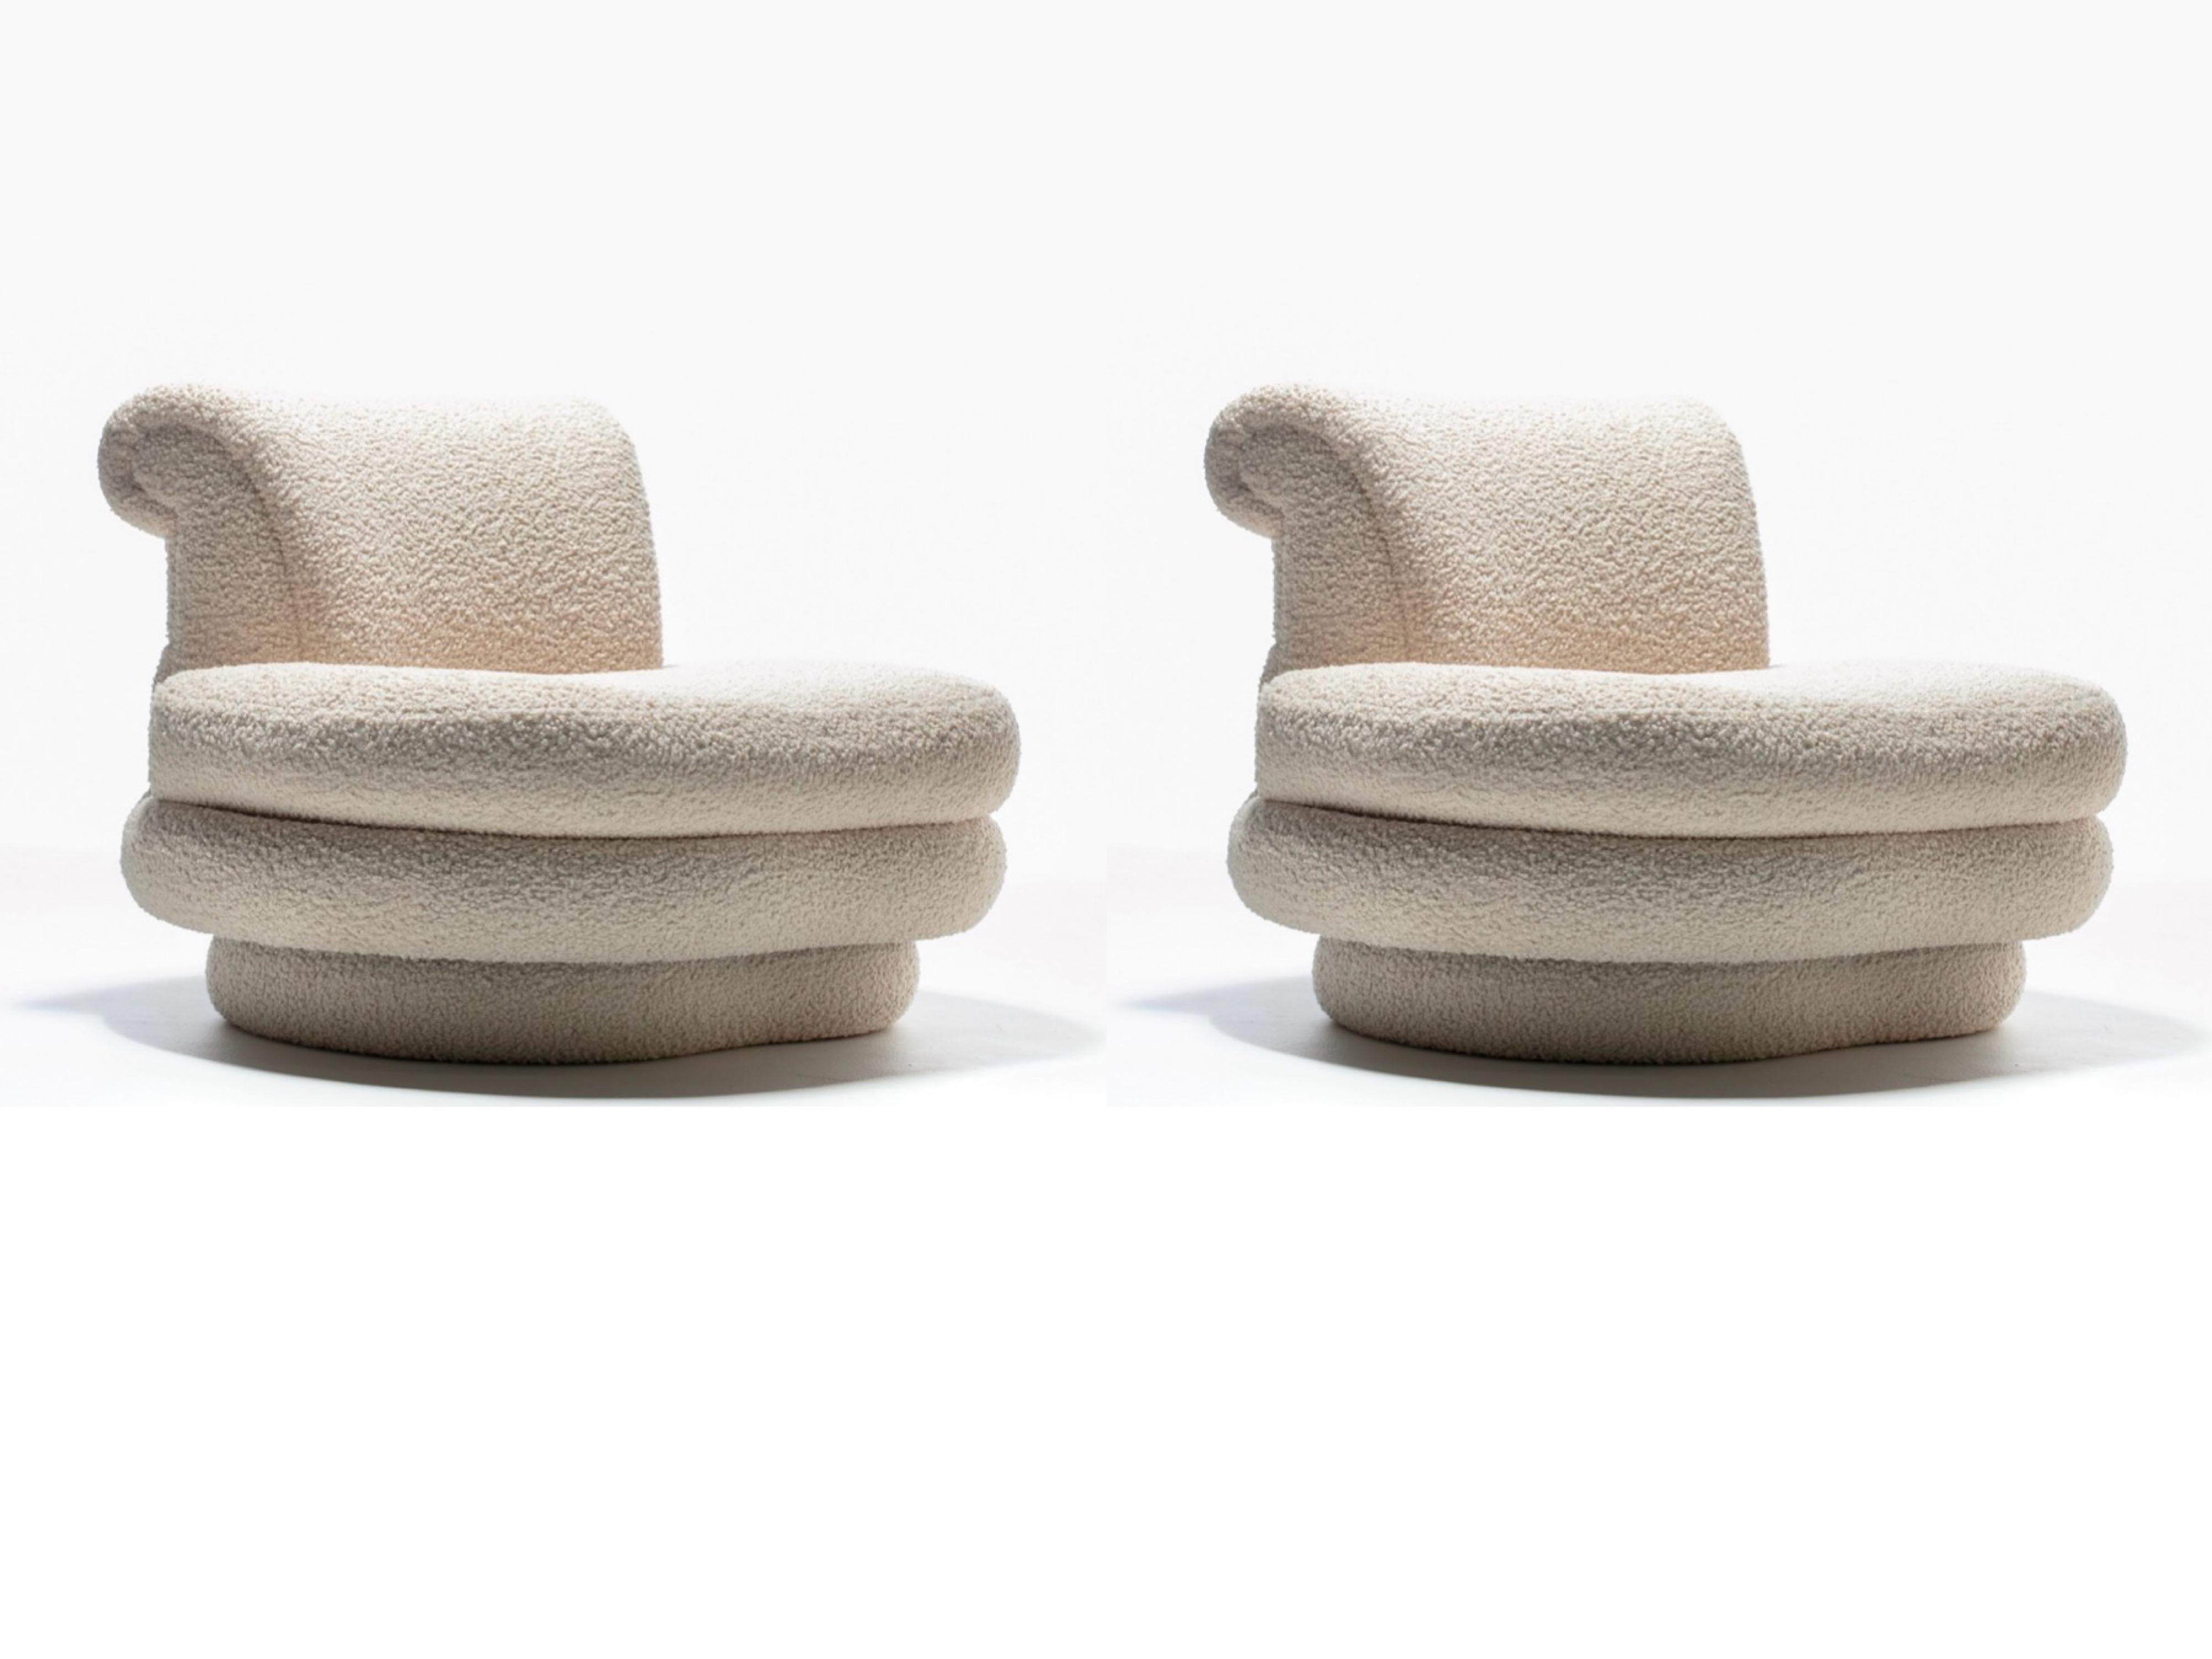 Pair of channeled Post Modern slipper chairs designed by Adrian Pearsall for Comfort Designs, Inc. If you're seeking chairs to wind down and relax in - the sort you can sit in for hours and enjoy - here they are. Stylish. Plush. Every inch of these 